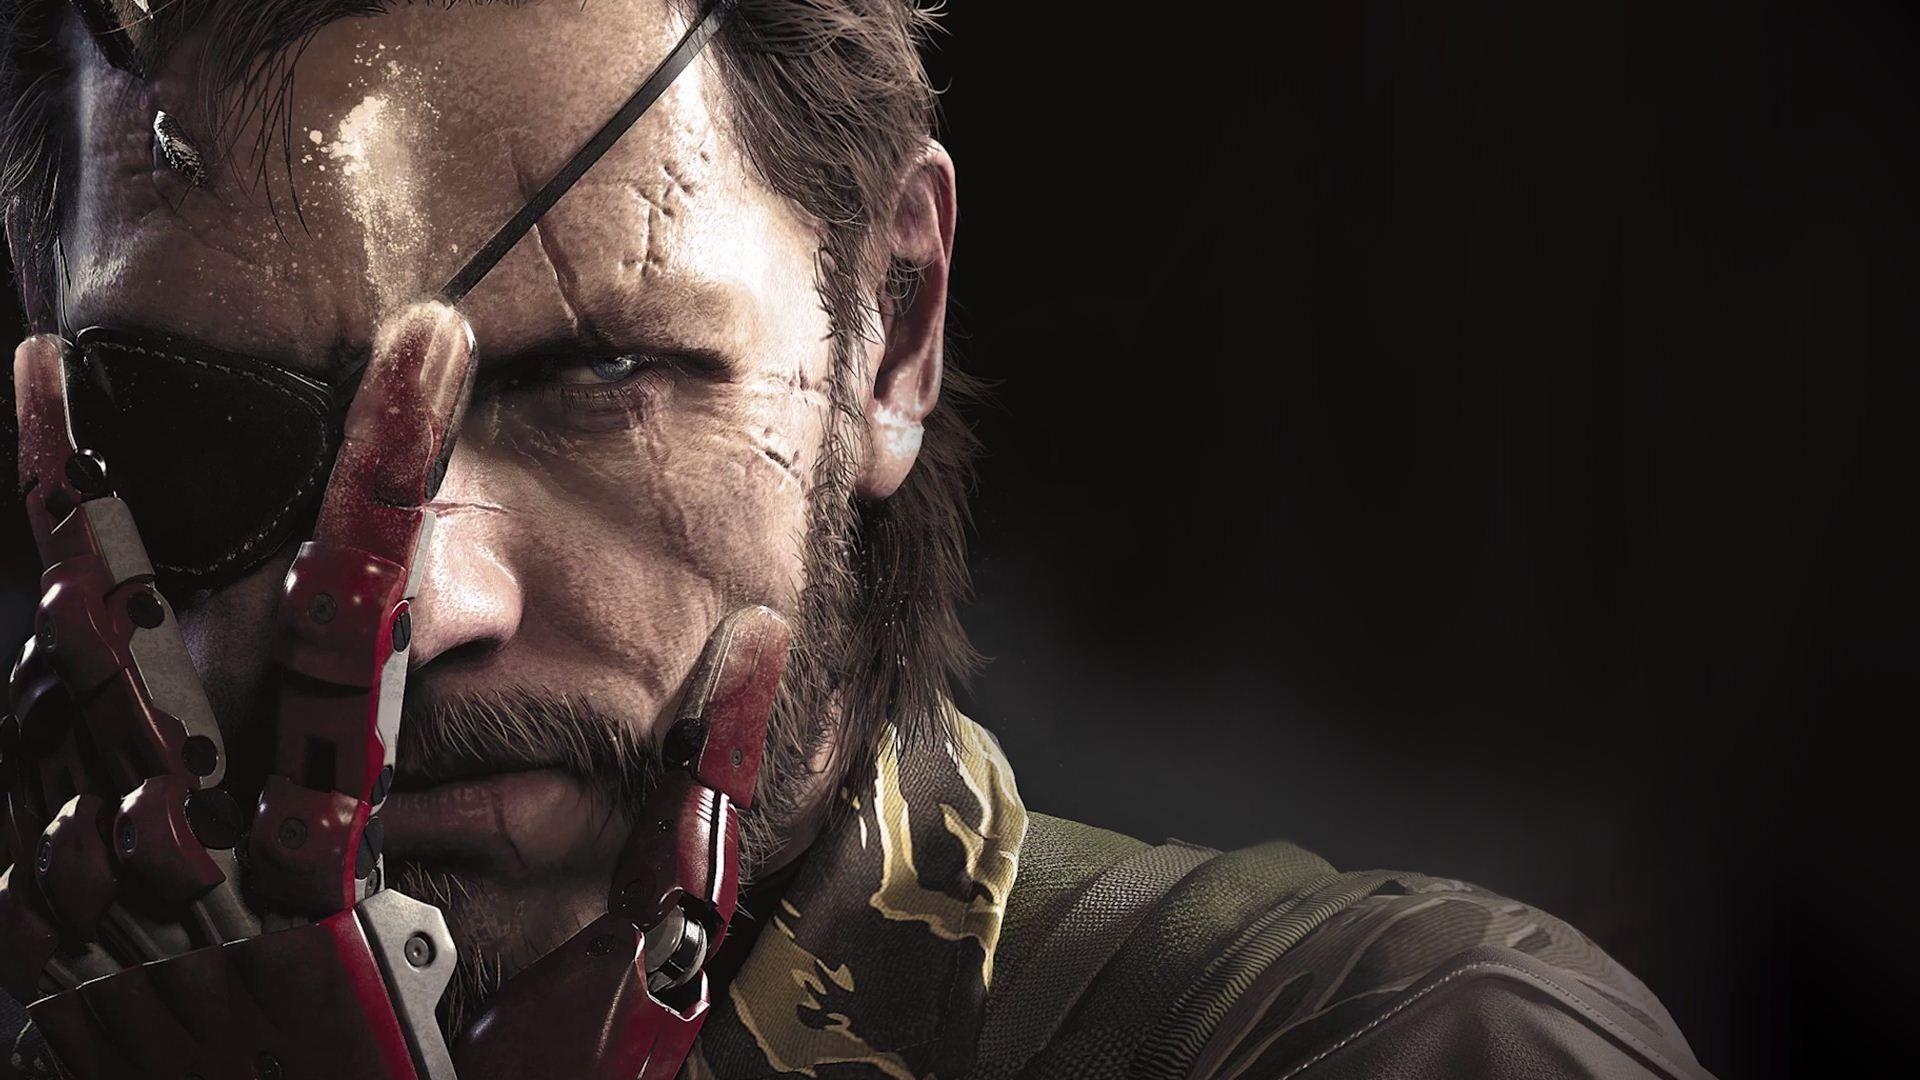 Metal Gear Solid The Phantom Pain - Game Completa 7 anos